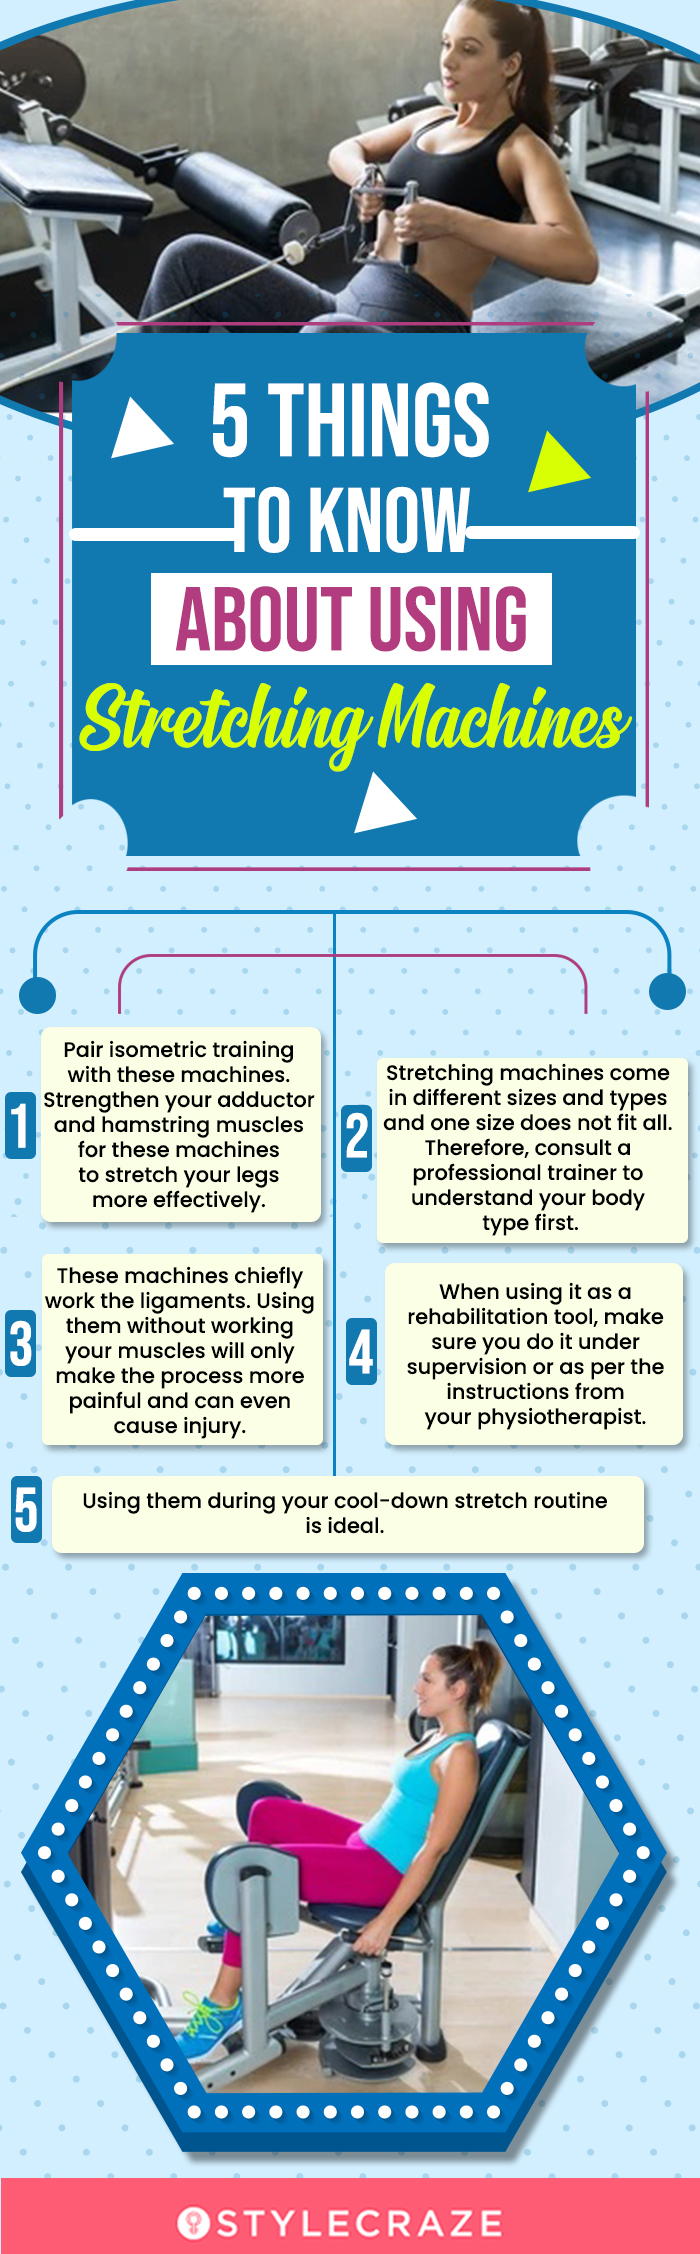 5 Things To Know About Using Stretching Machines (infographic)